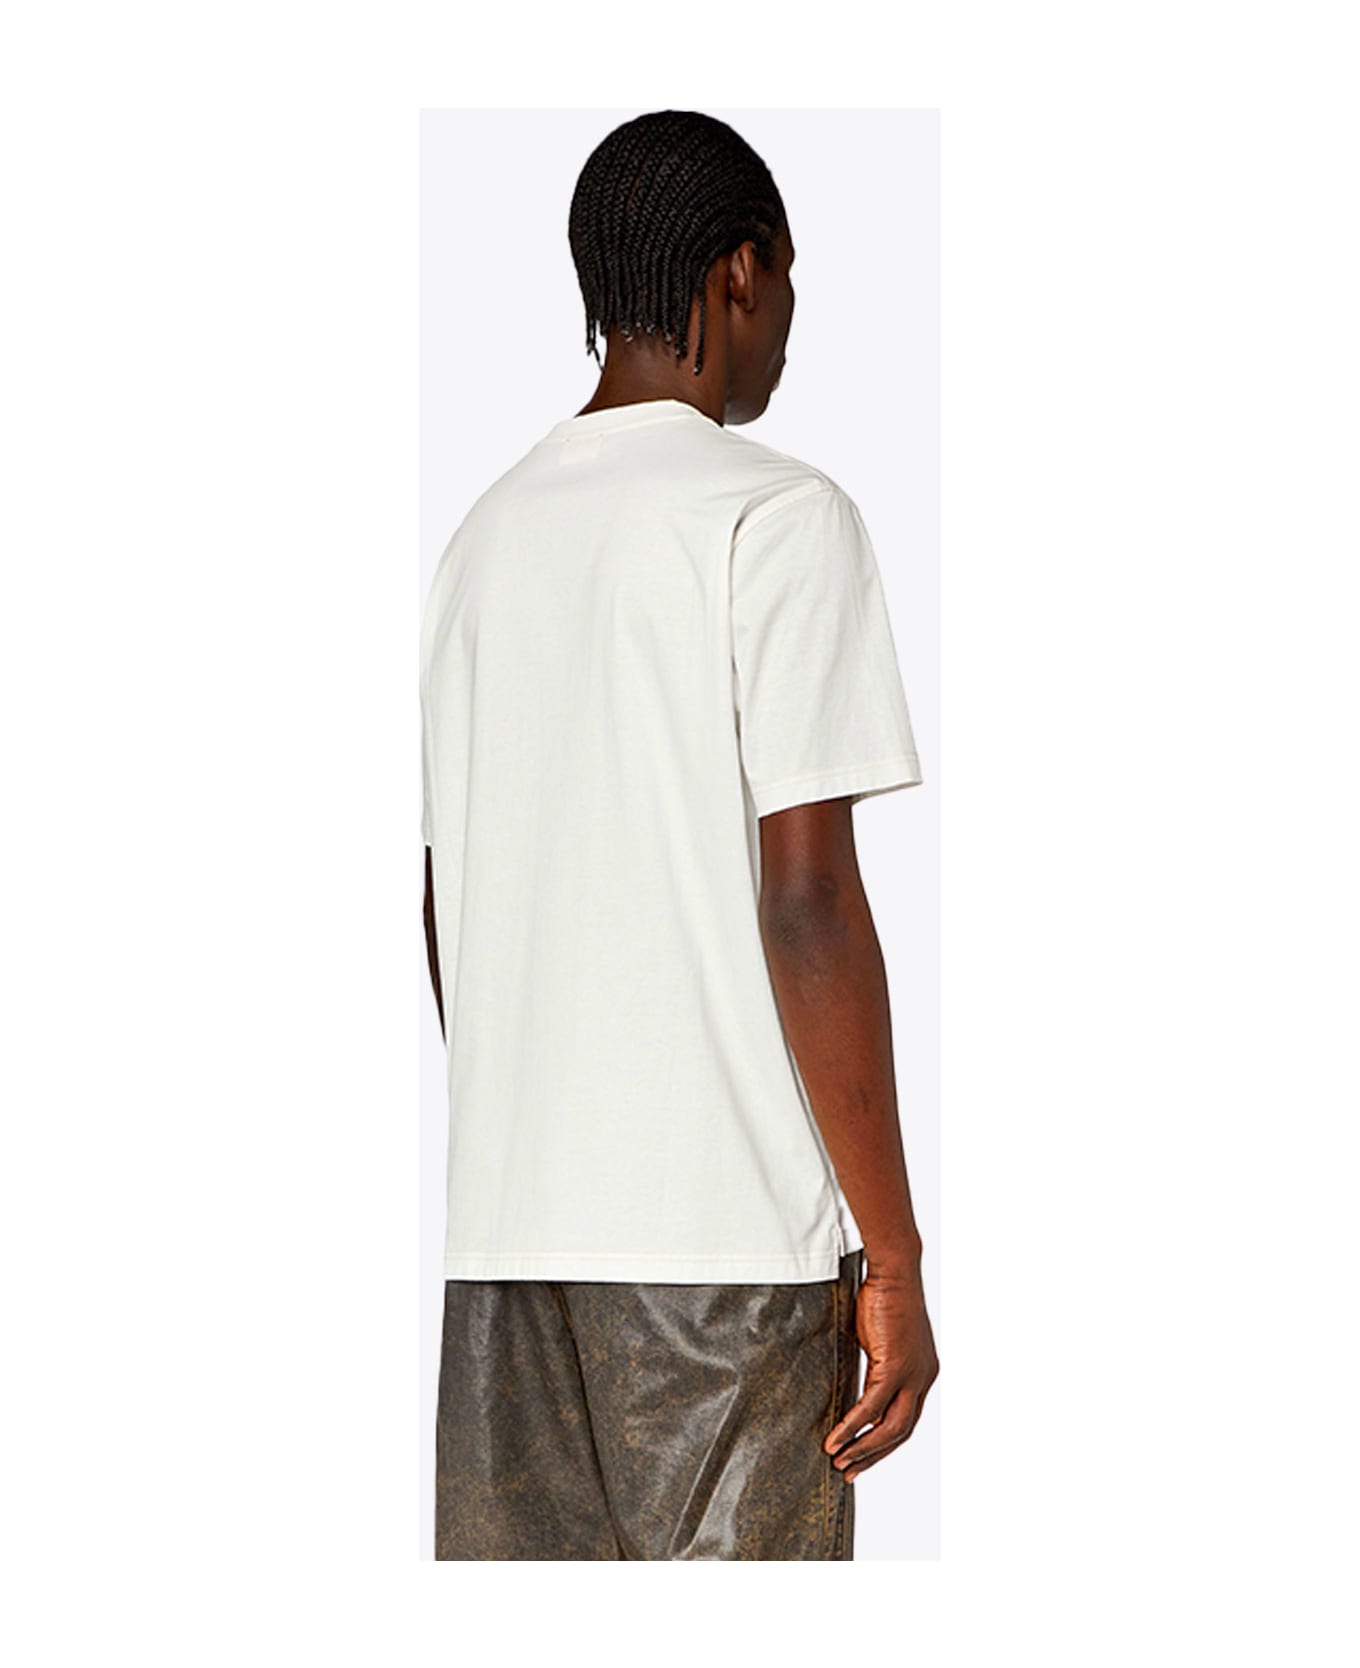 Diesel T-must-slits-n2 White Cotton T-shirt With Tonal Print - T Must Slits N2